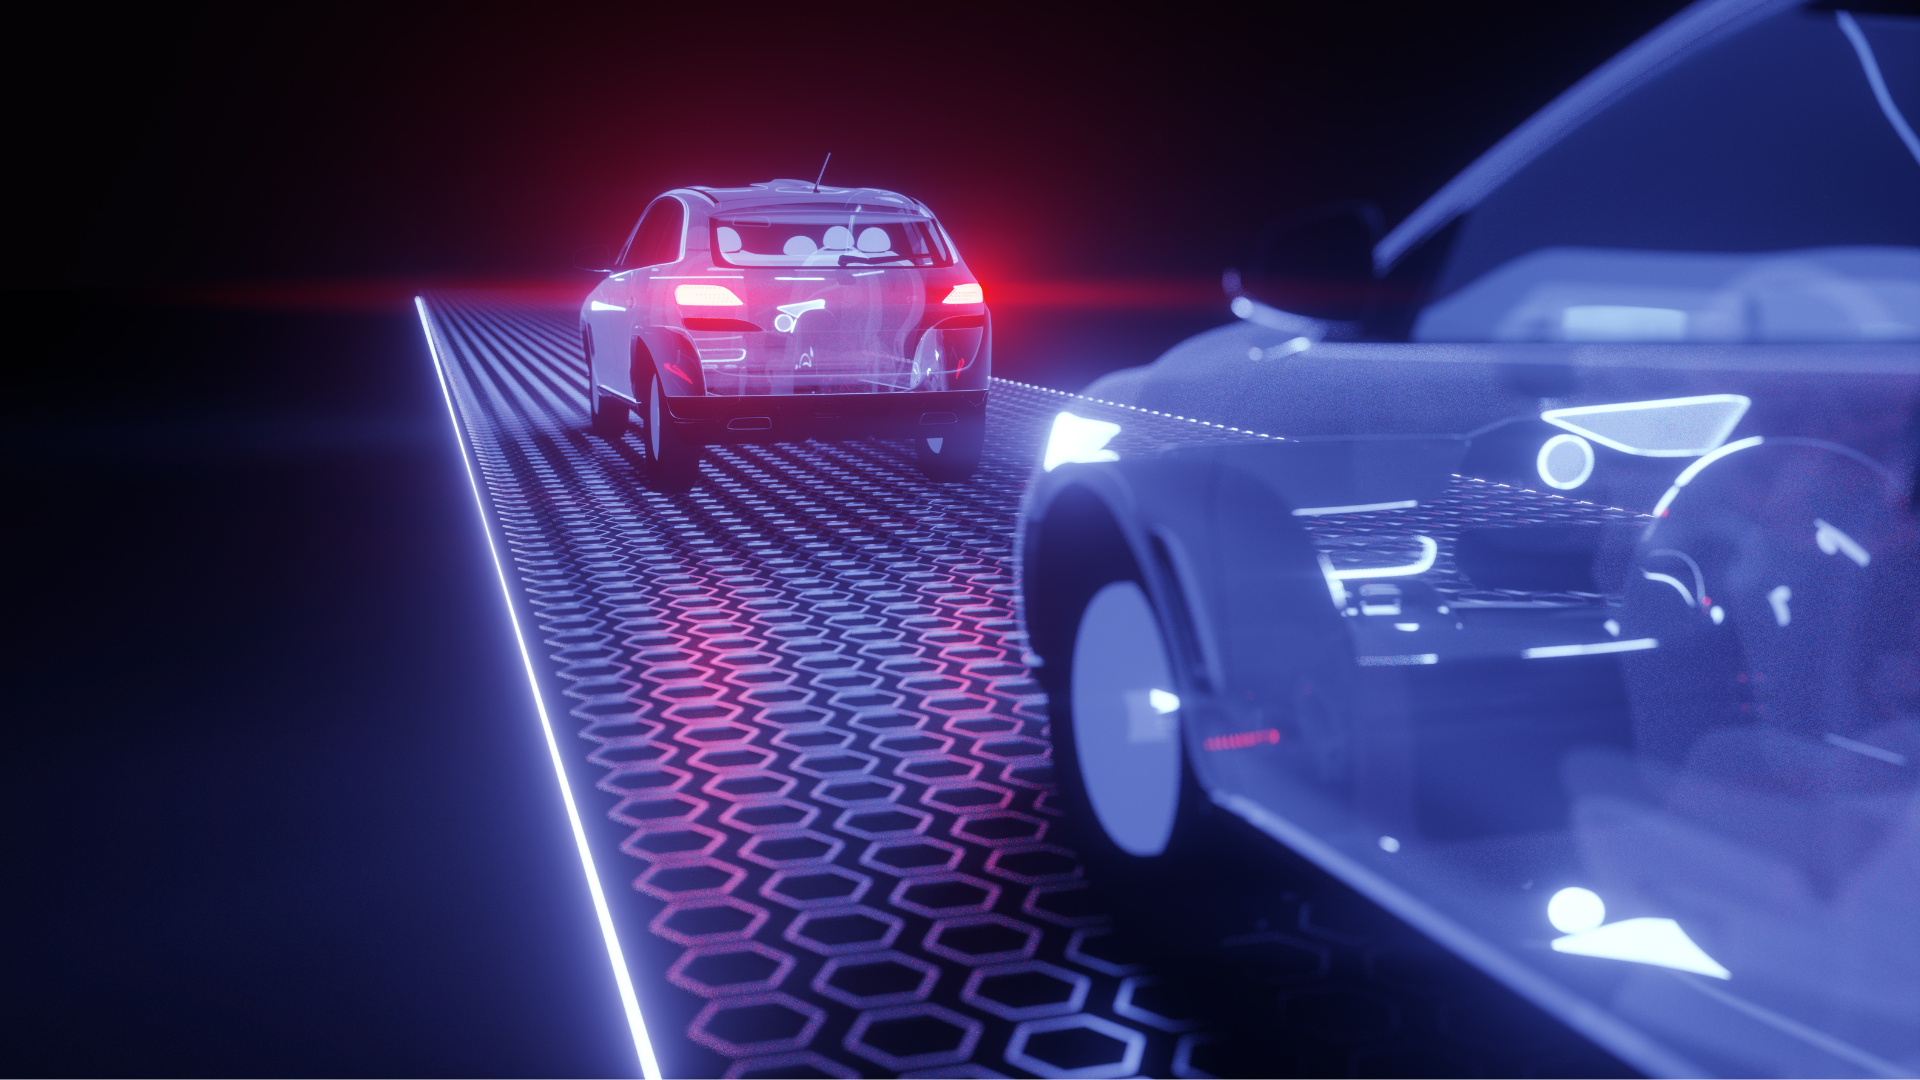 Connected and autonomous vehicle technology is rapidly evolving, making proactive planning more important than ever. Key to this planning is determining how the evolving technology not only impacts large cities, but also mid-sized regions.